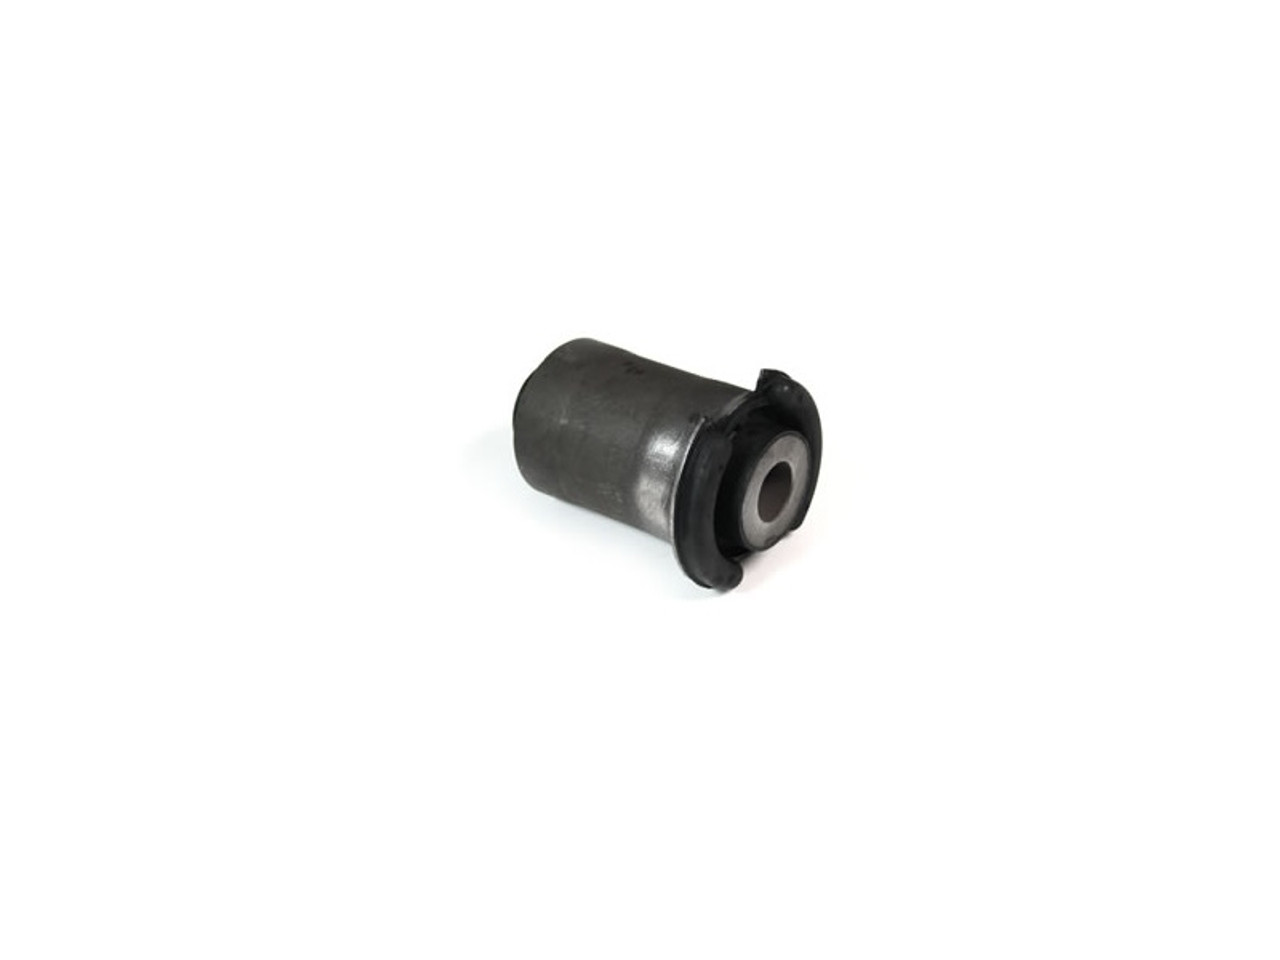 Allmakes 4x4 Discovery 3 and 4 Rear Lower Arm Rear Bush - LR054831